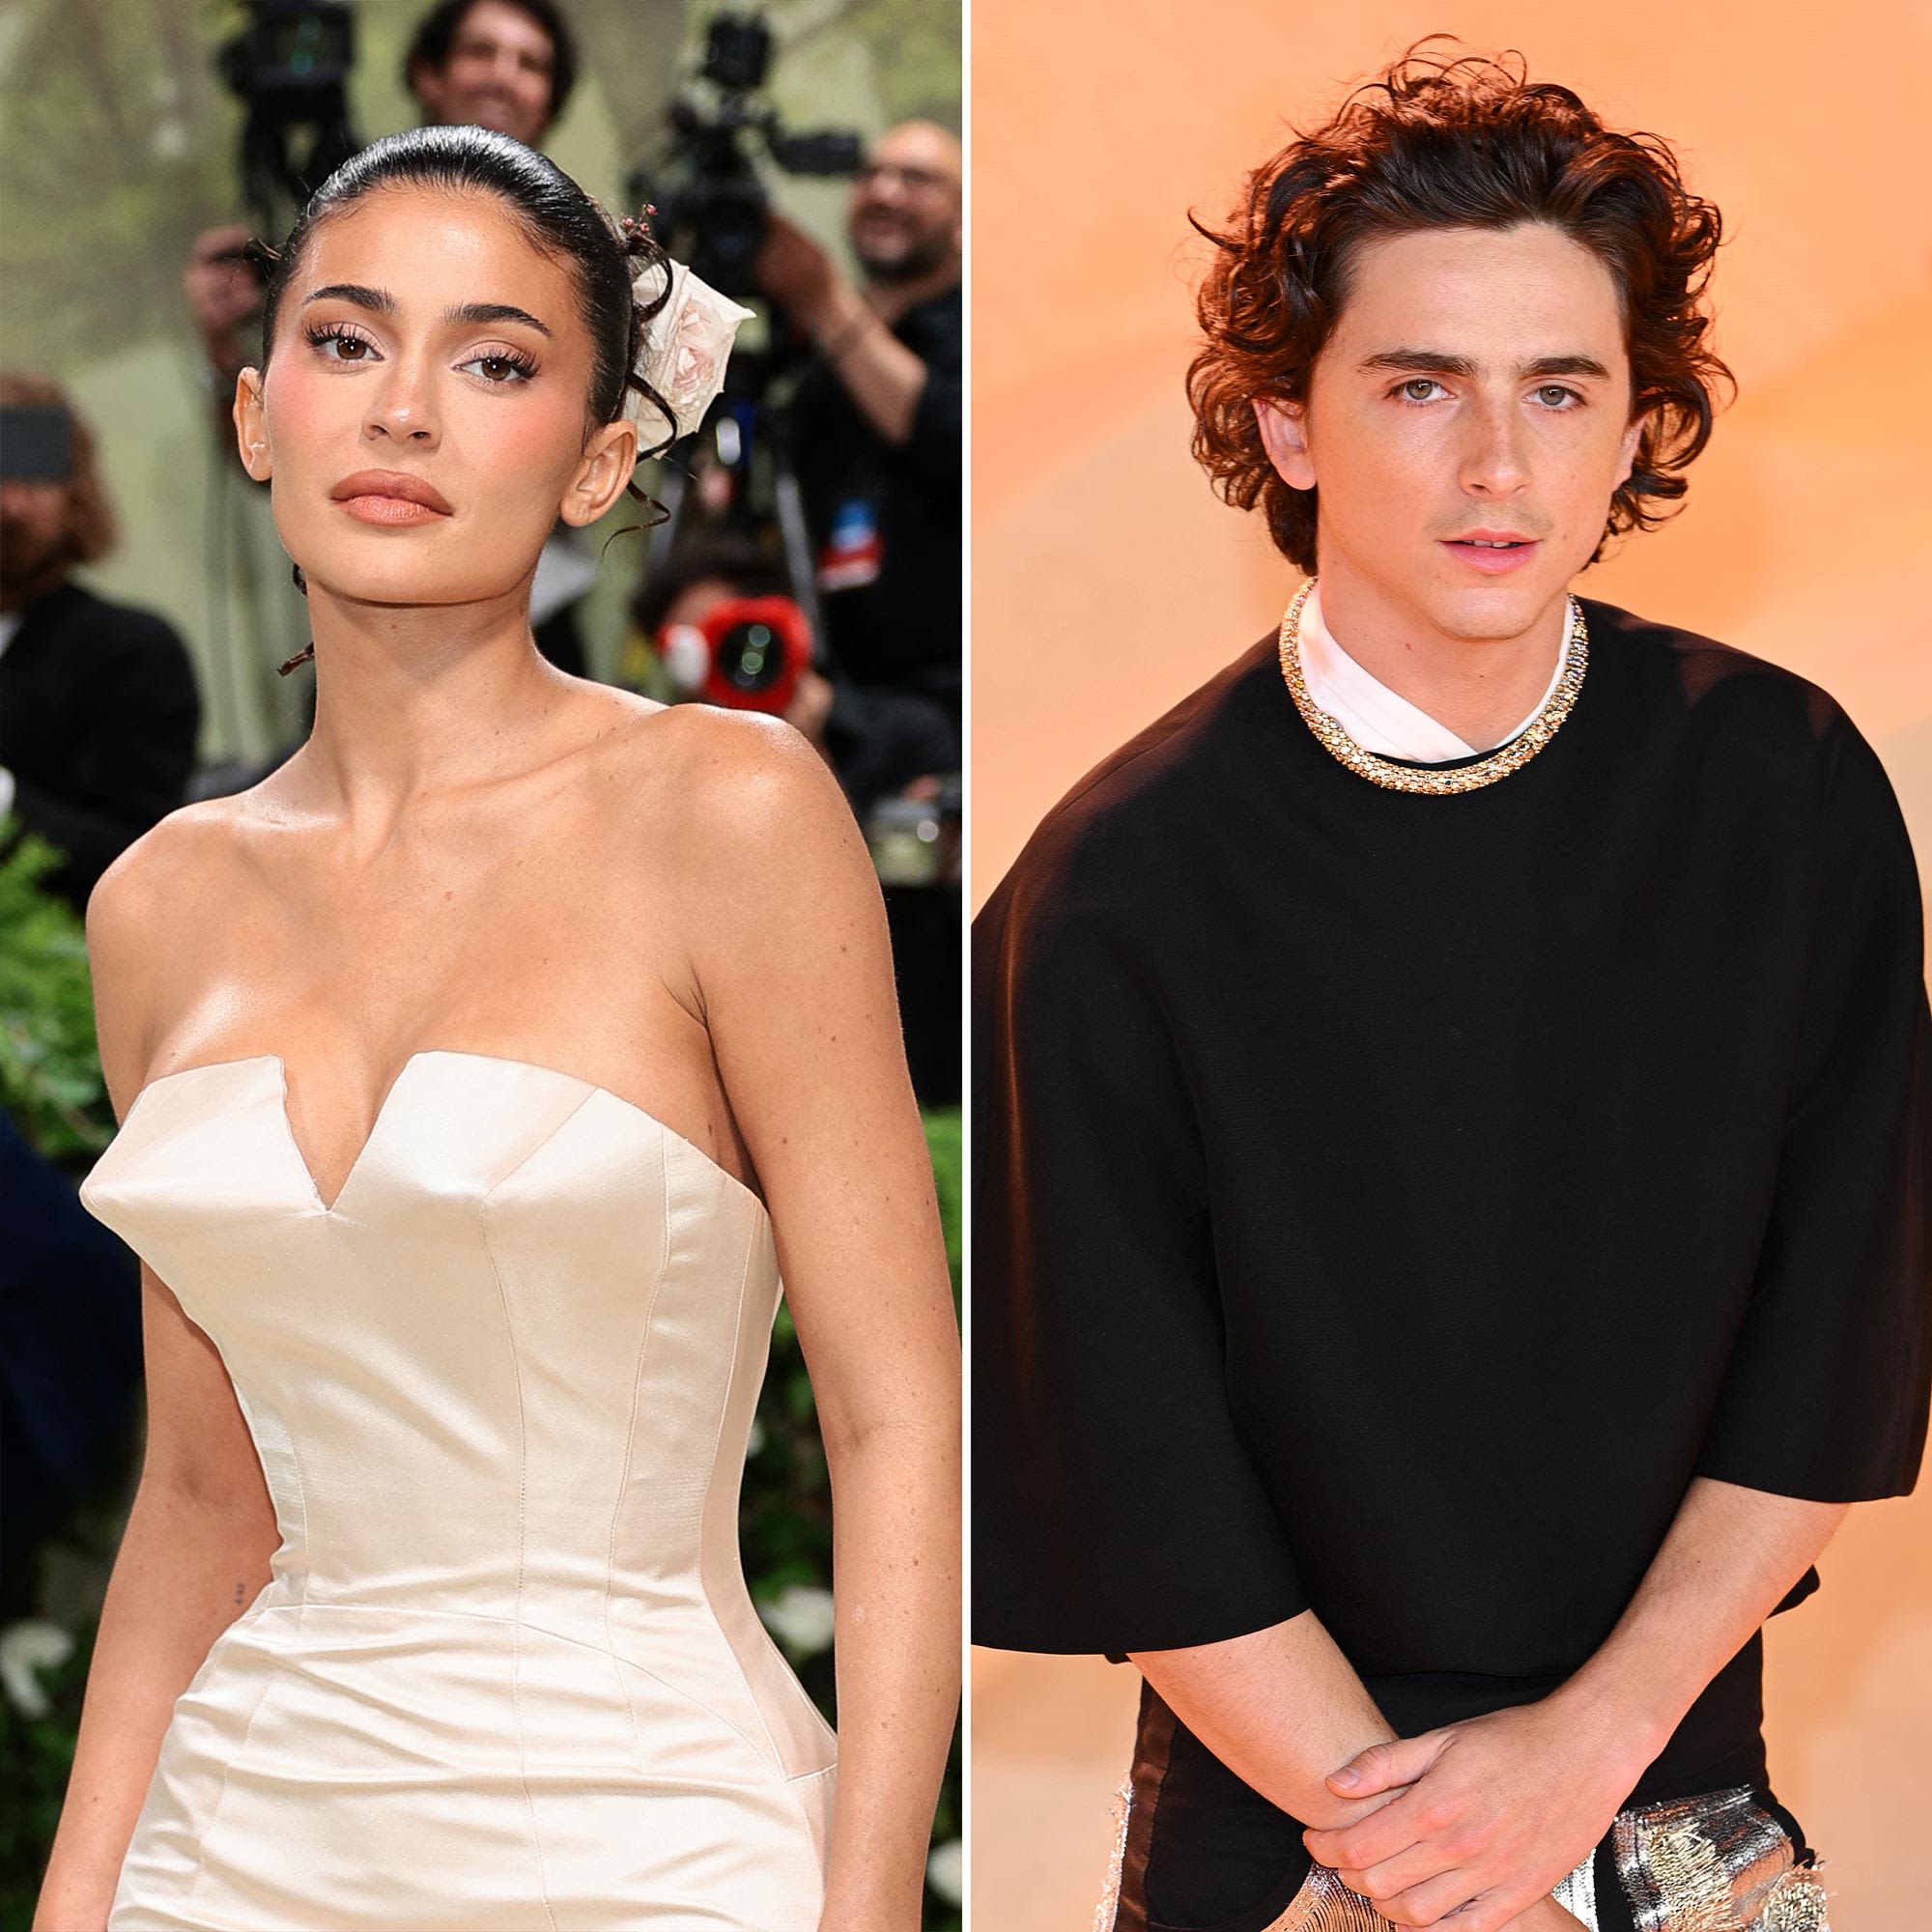 Why Fans Think Kylie Jenner Gave a Nod to Timothee Chalamet in ‘Kardashians’ Teaser